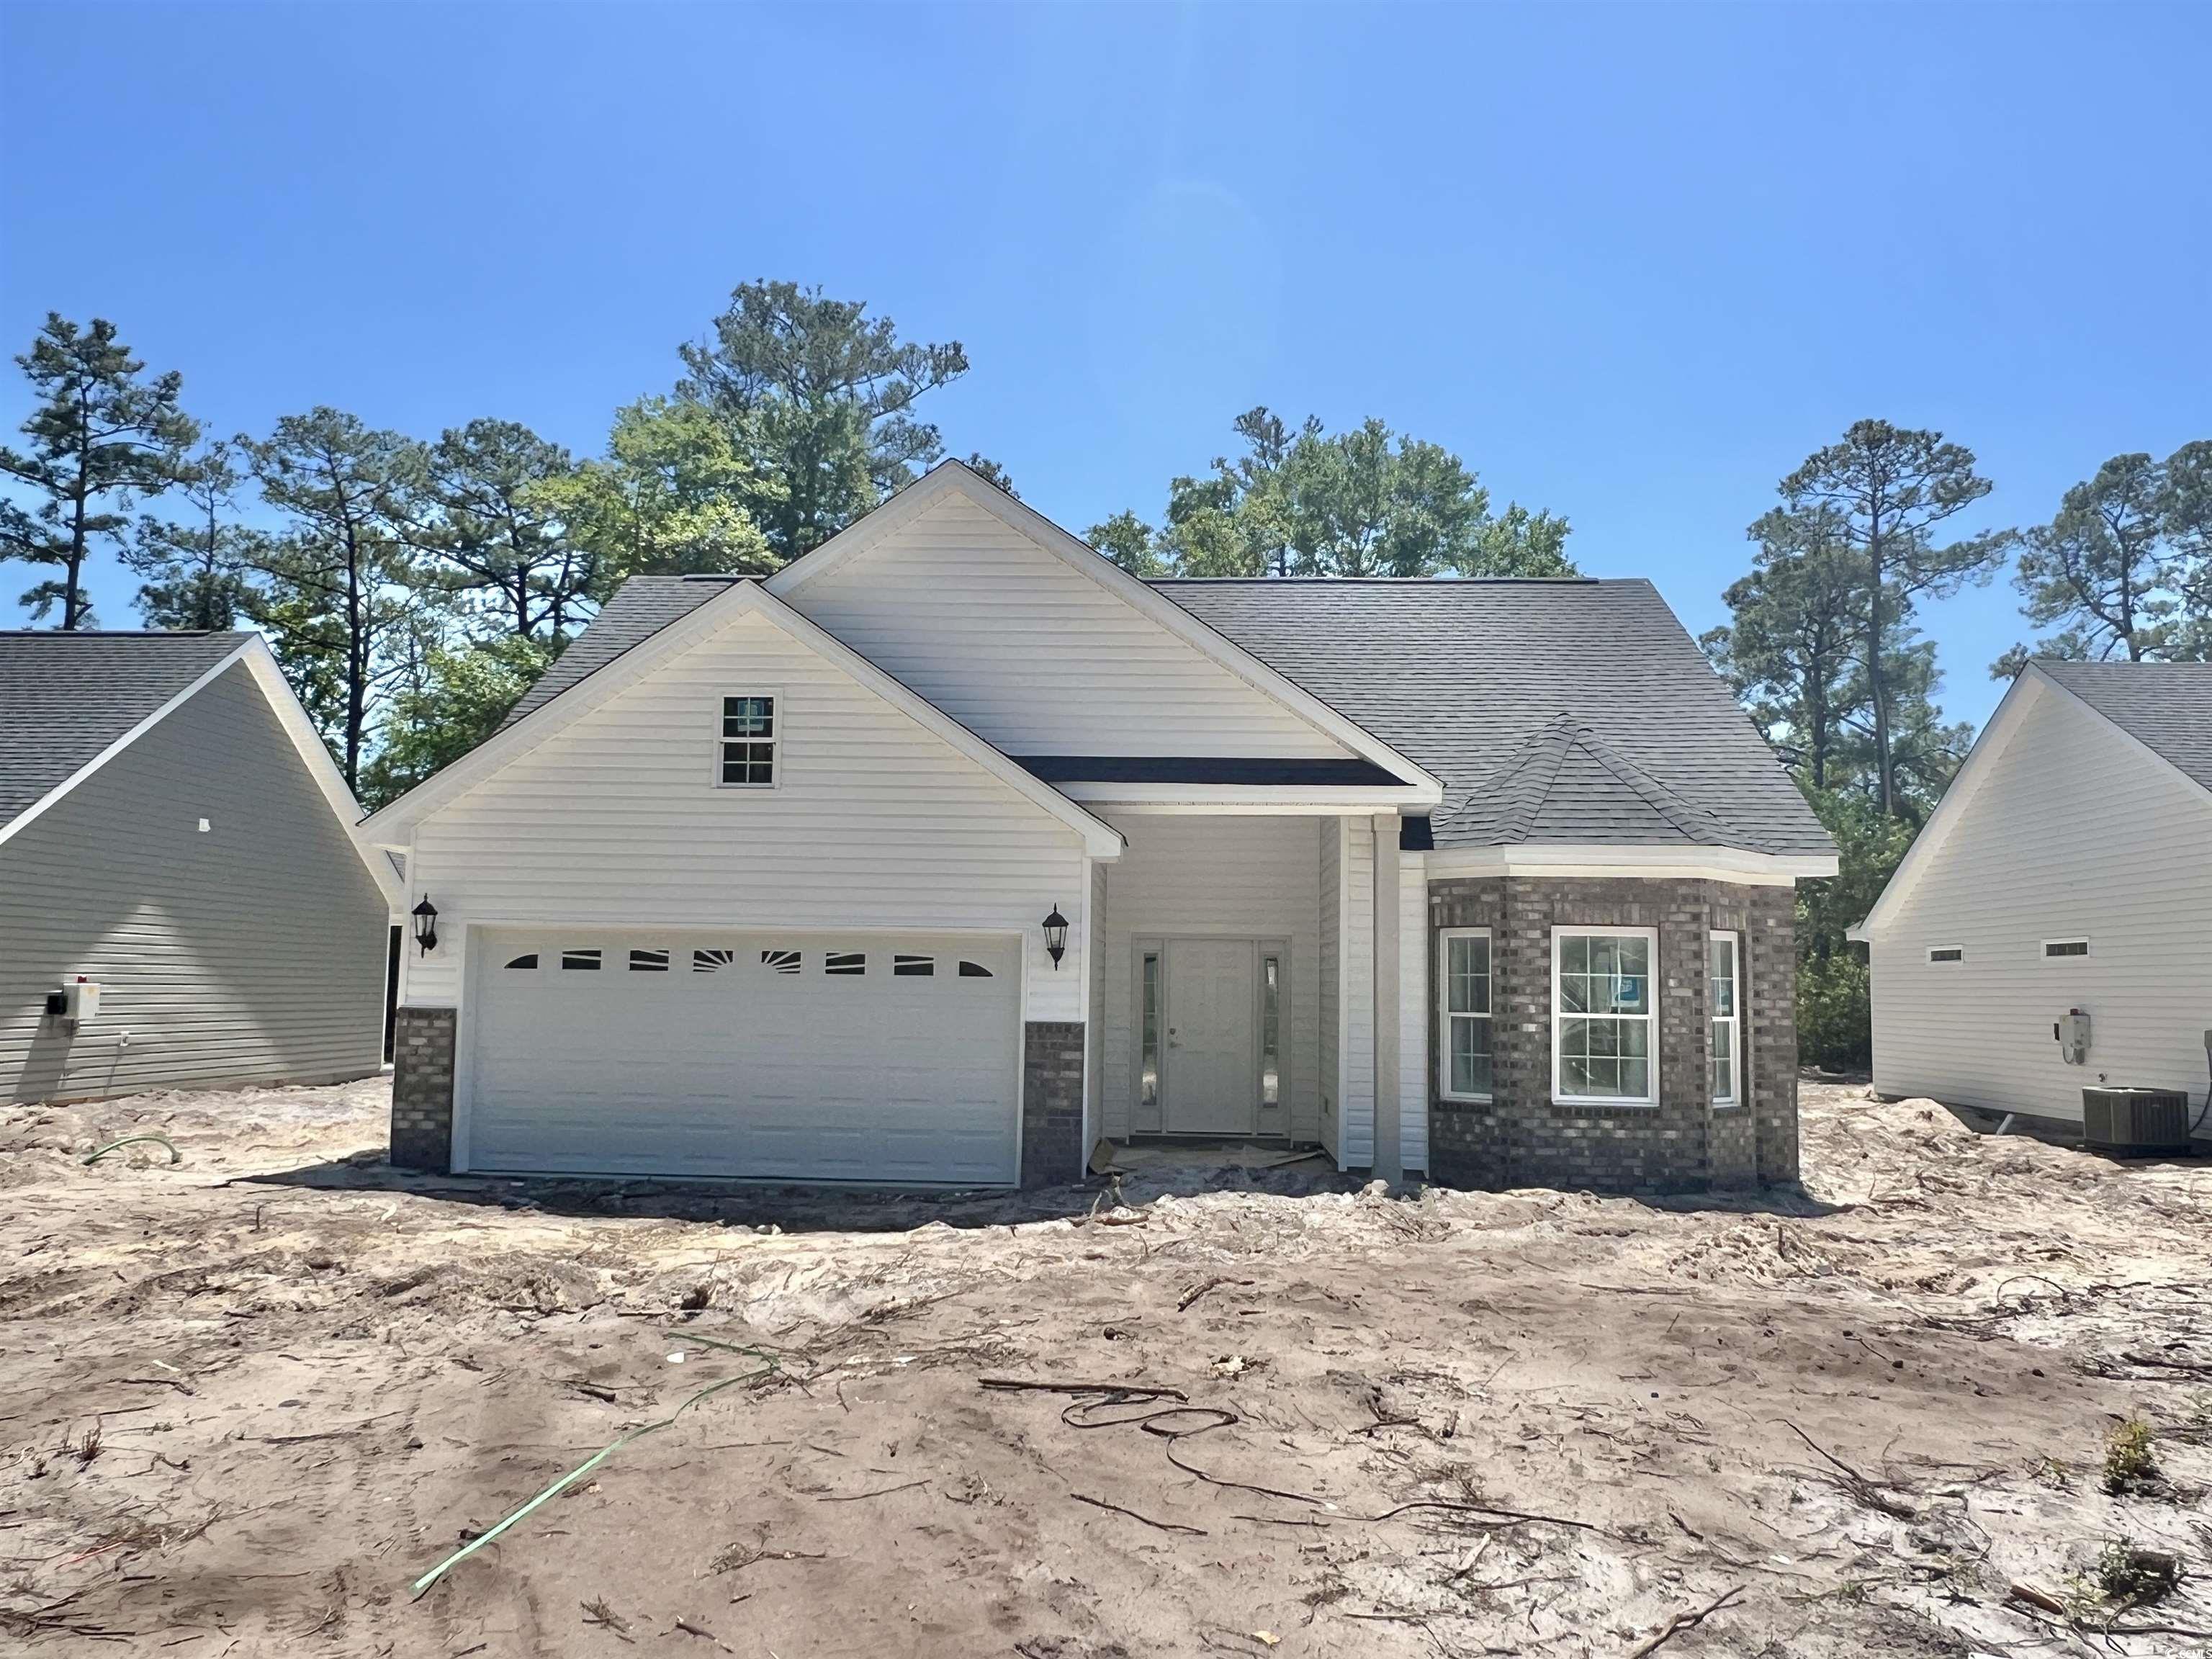 1622 San Andres Ave. Little River, SC 29566